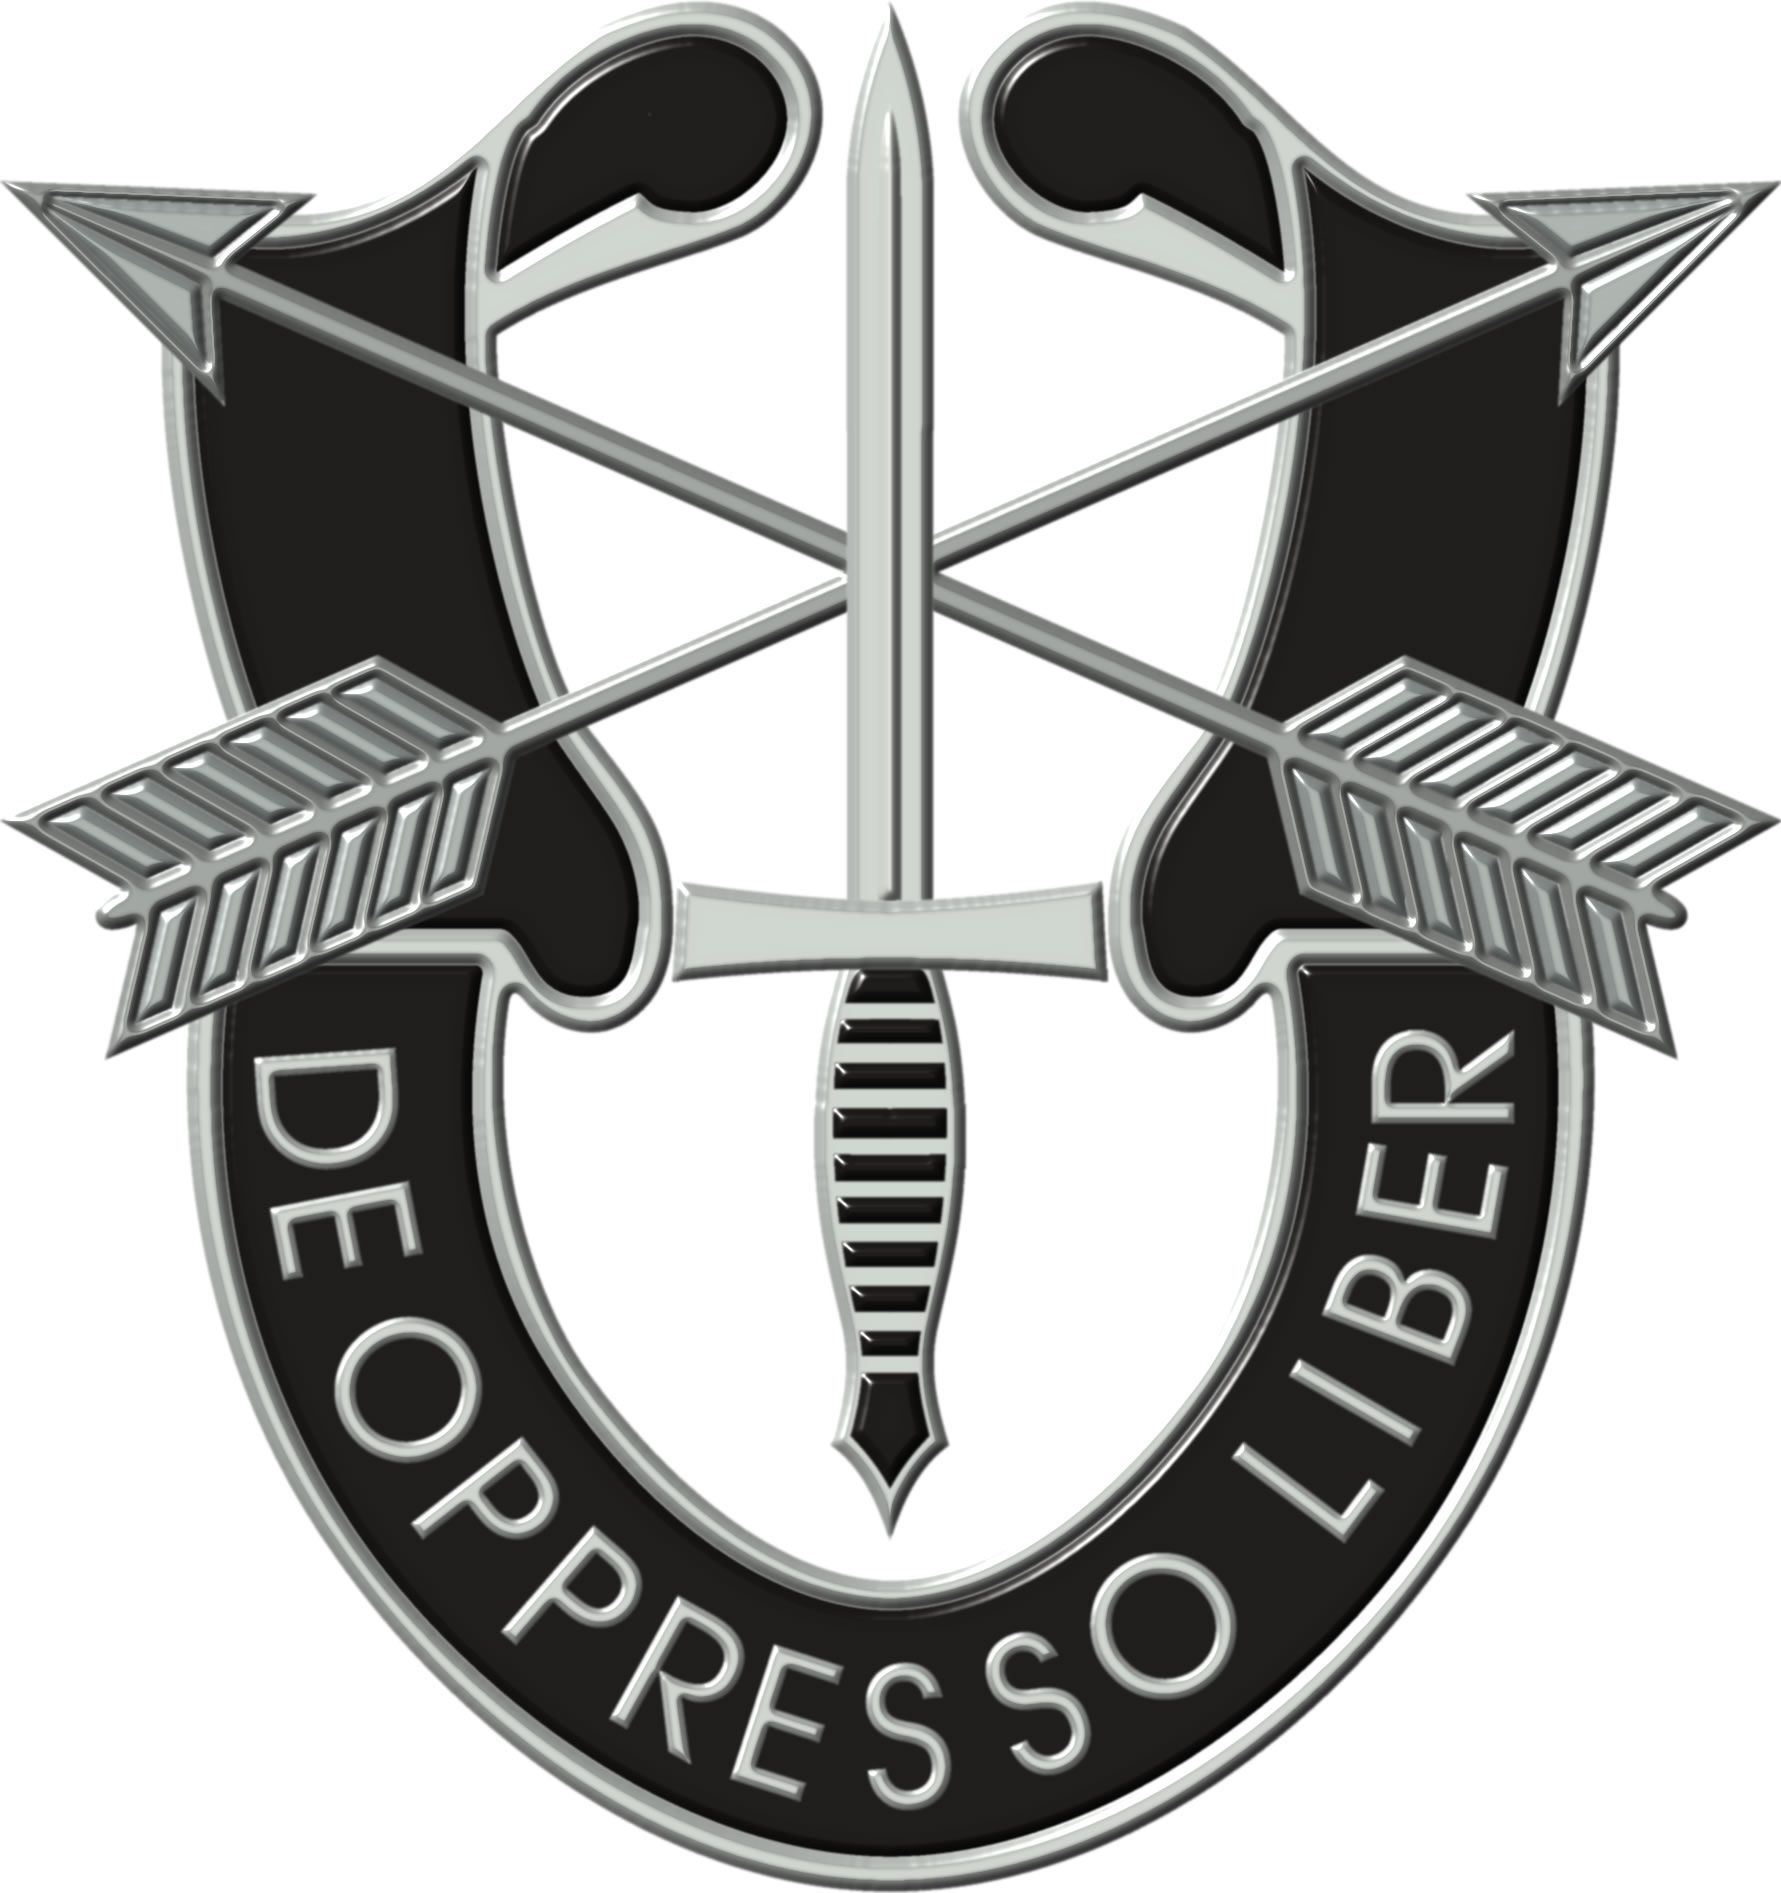  Special forces  Logos